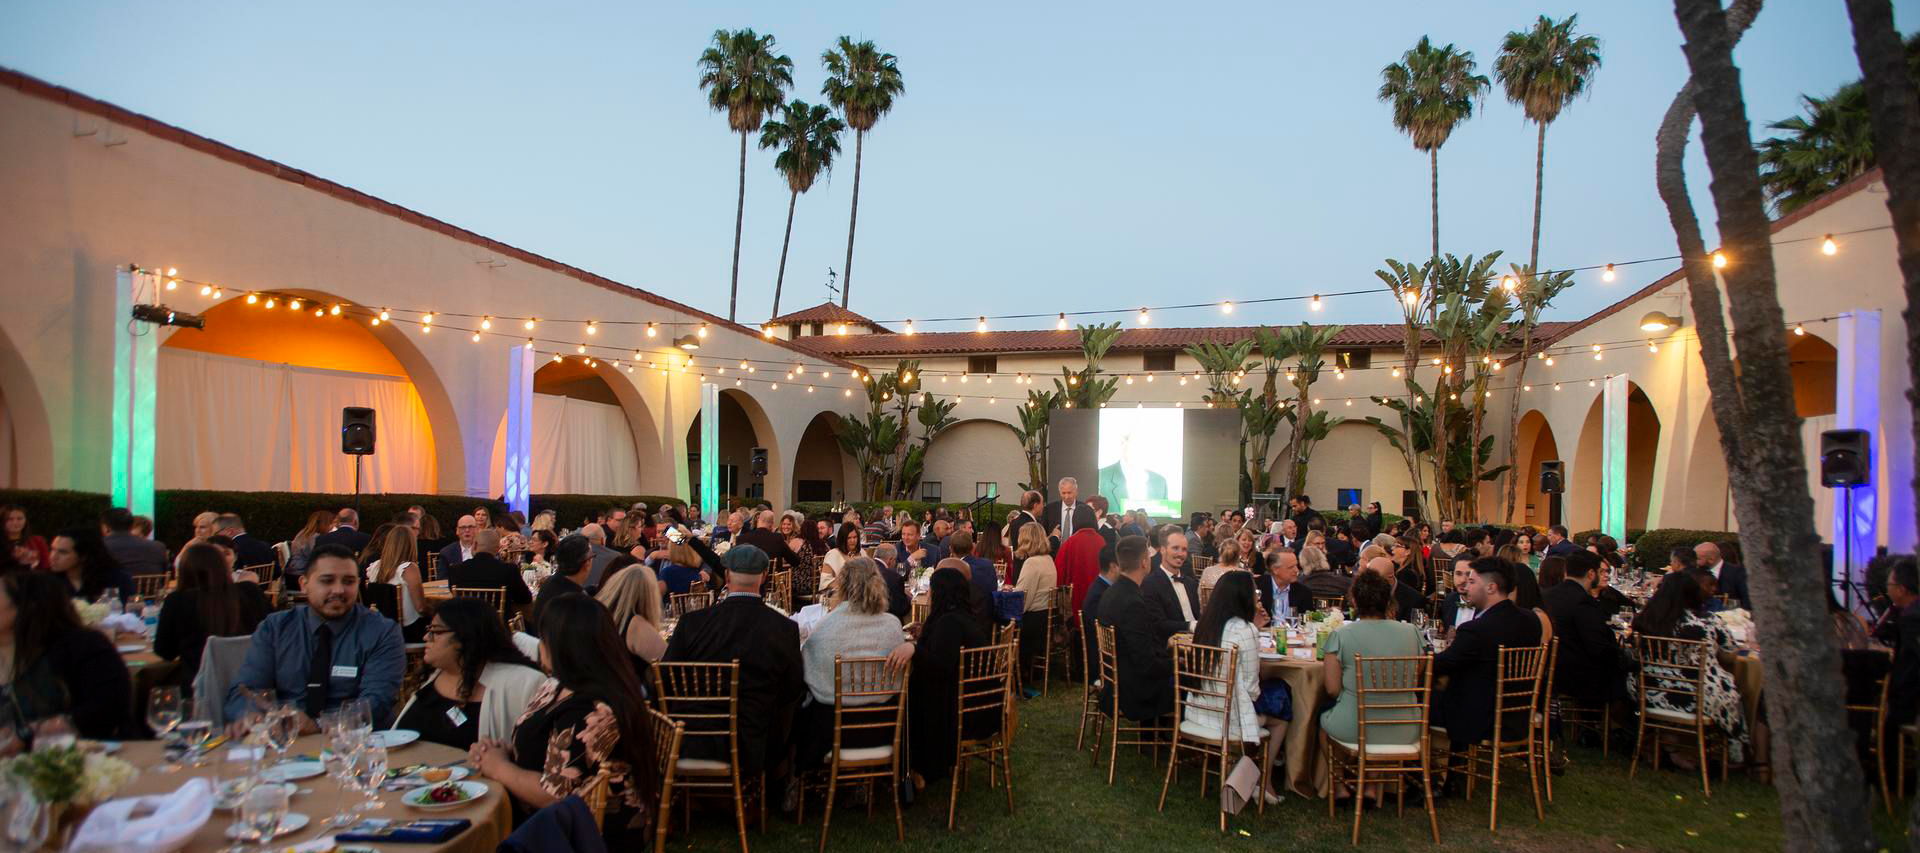 The Old Stables during the Distinguished Alumni Gala event